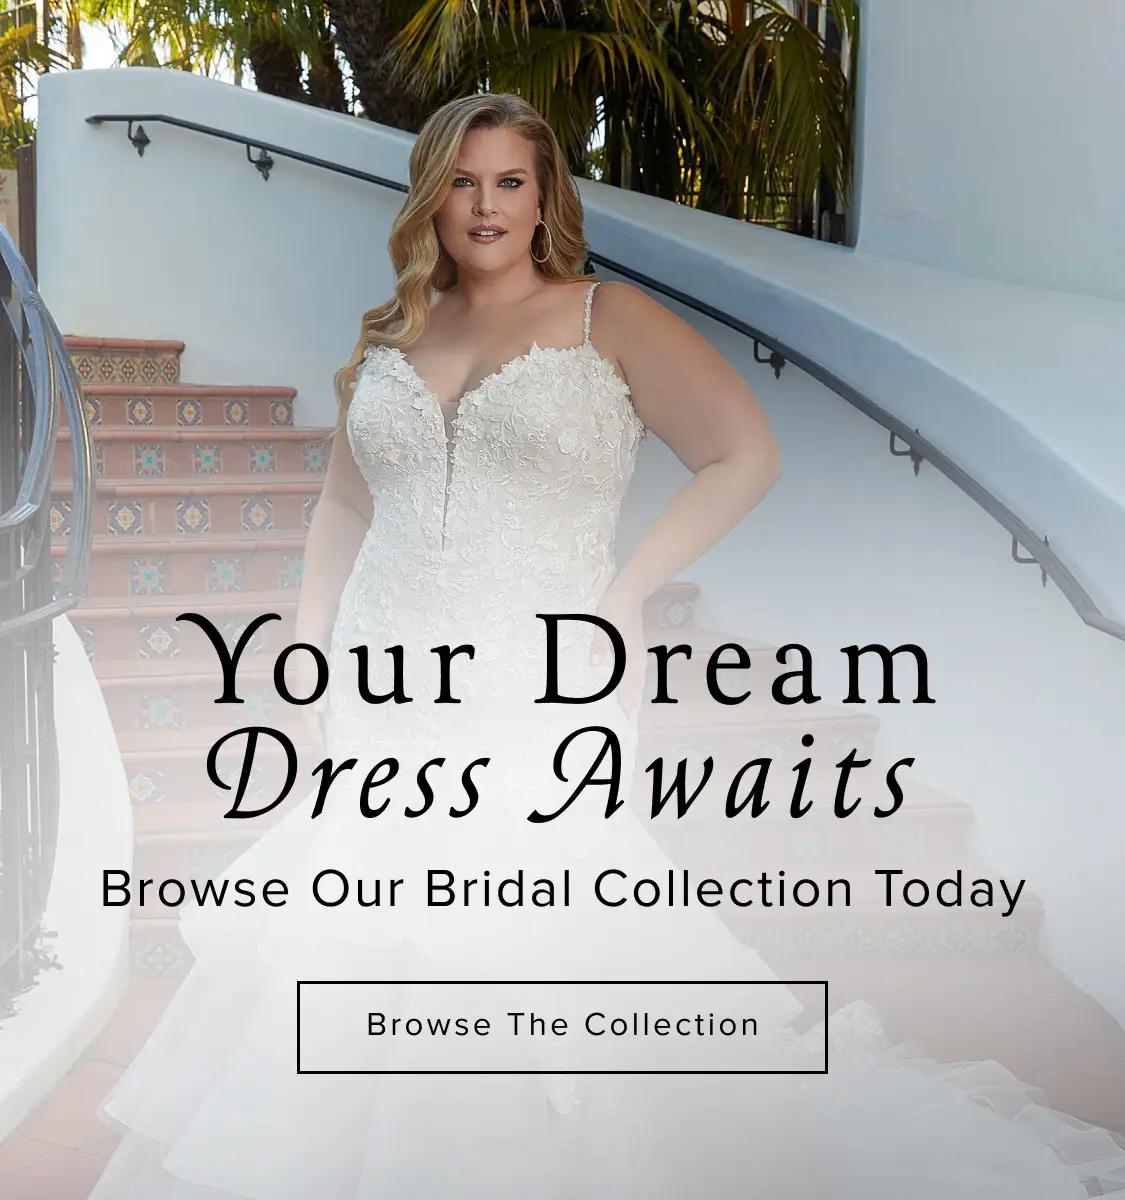 Your dream dress awaits, browse bridal mobile banner.